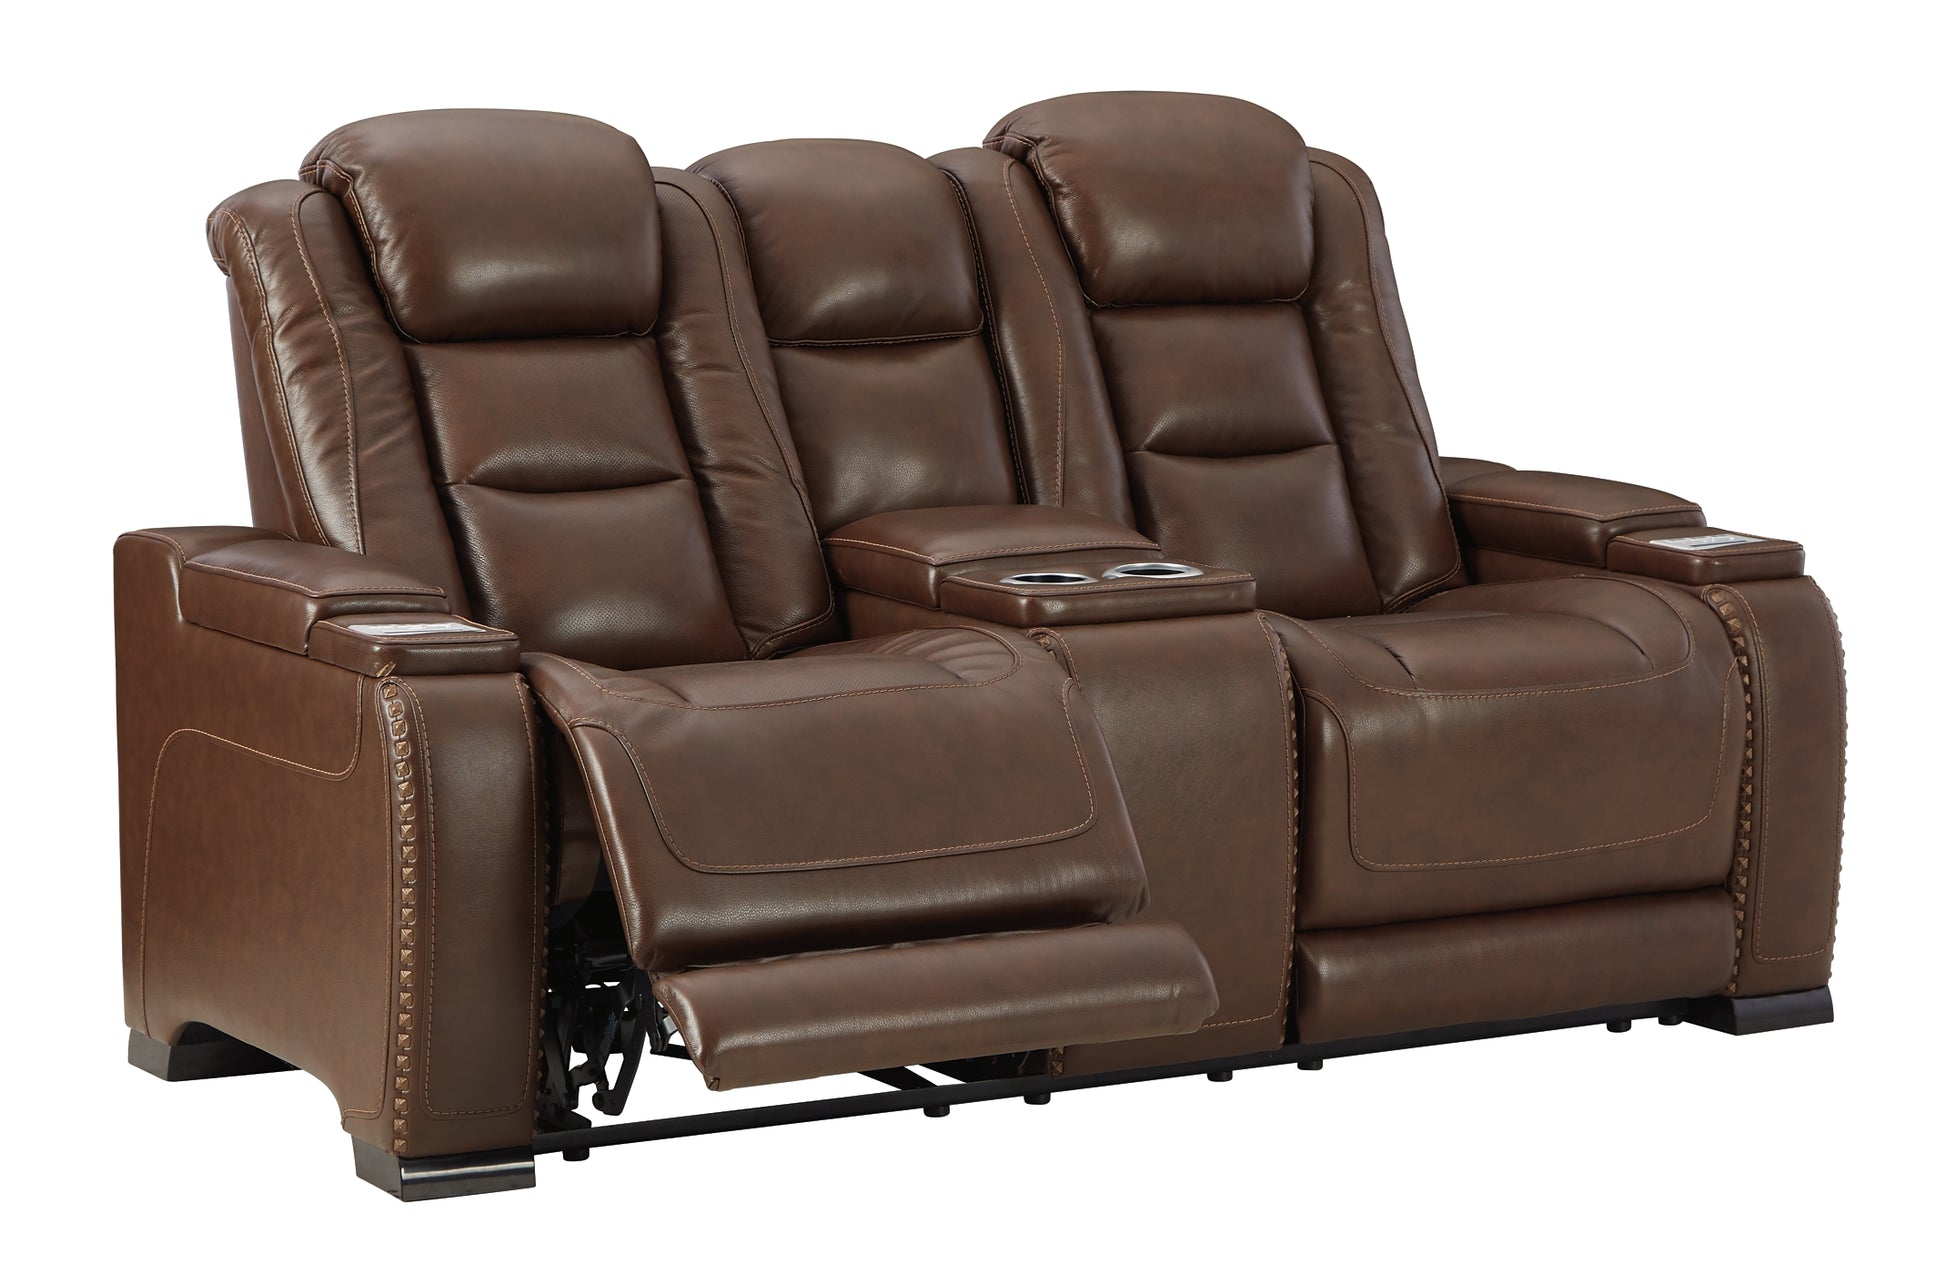 The Man-Den Sofa and Loveseat JB's Furniture  Home Furniture, Home Decor, Furniture Store